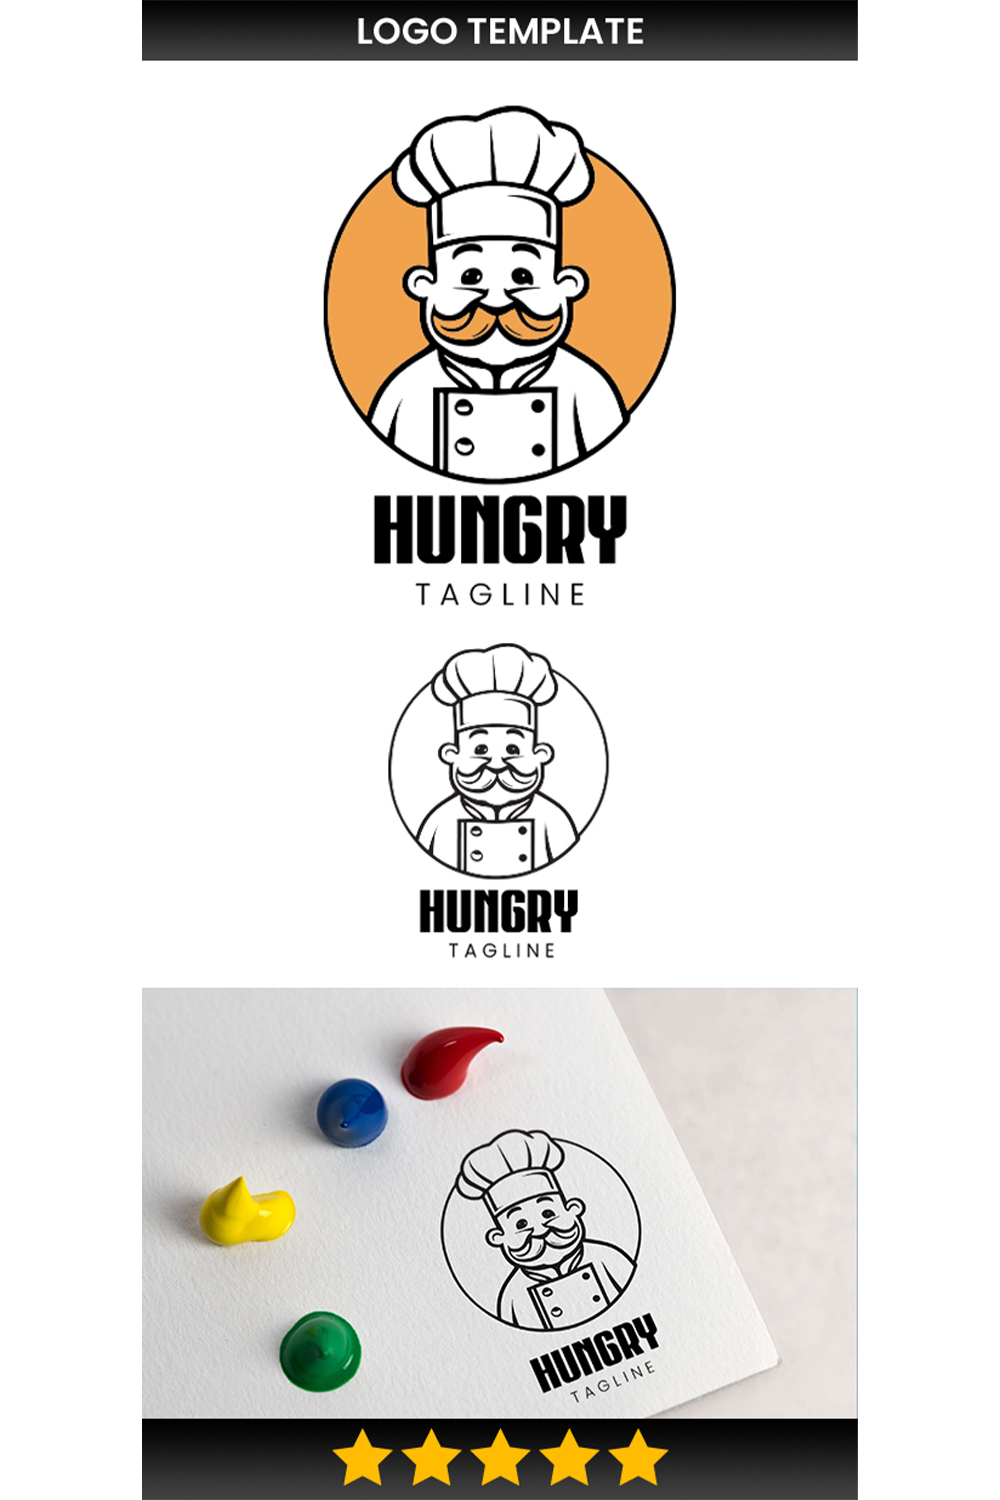 The restaurant and flat chef logo pinterest preview image.